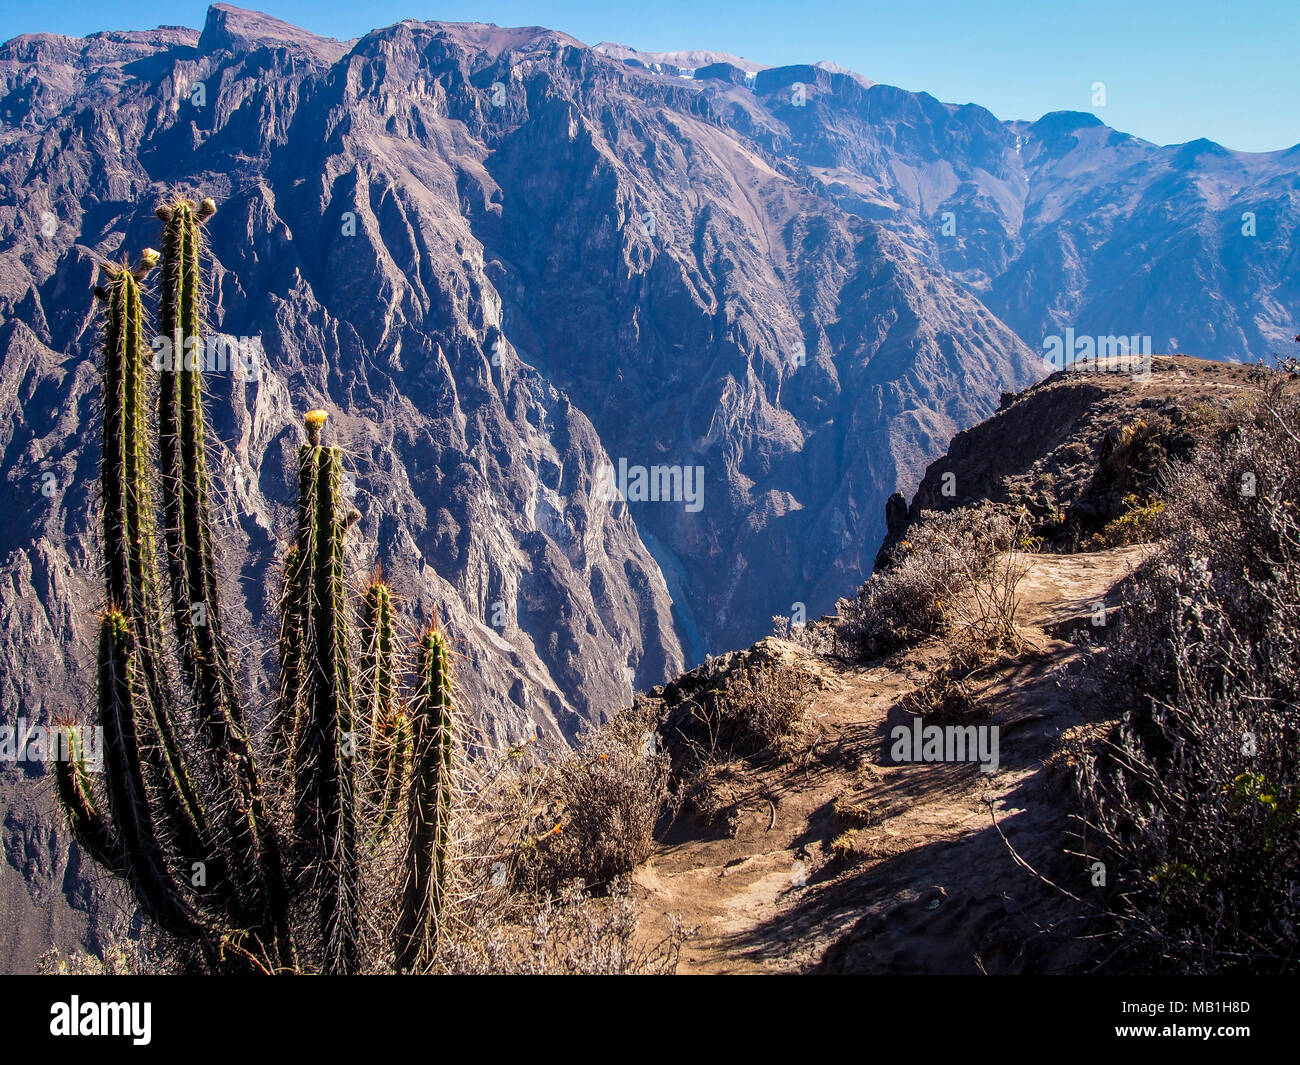 Arid landscape with a beautiful cactus in the Colca Canyon, Perú Stock Photo